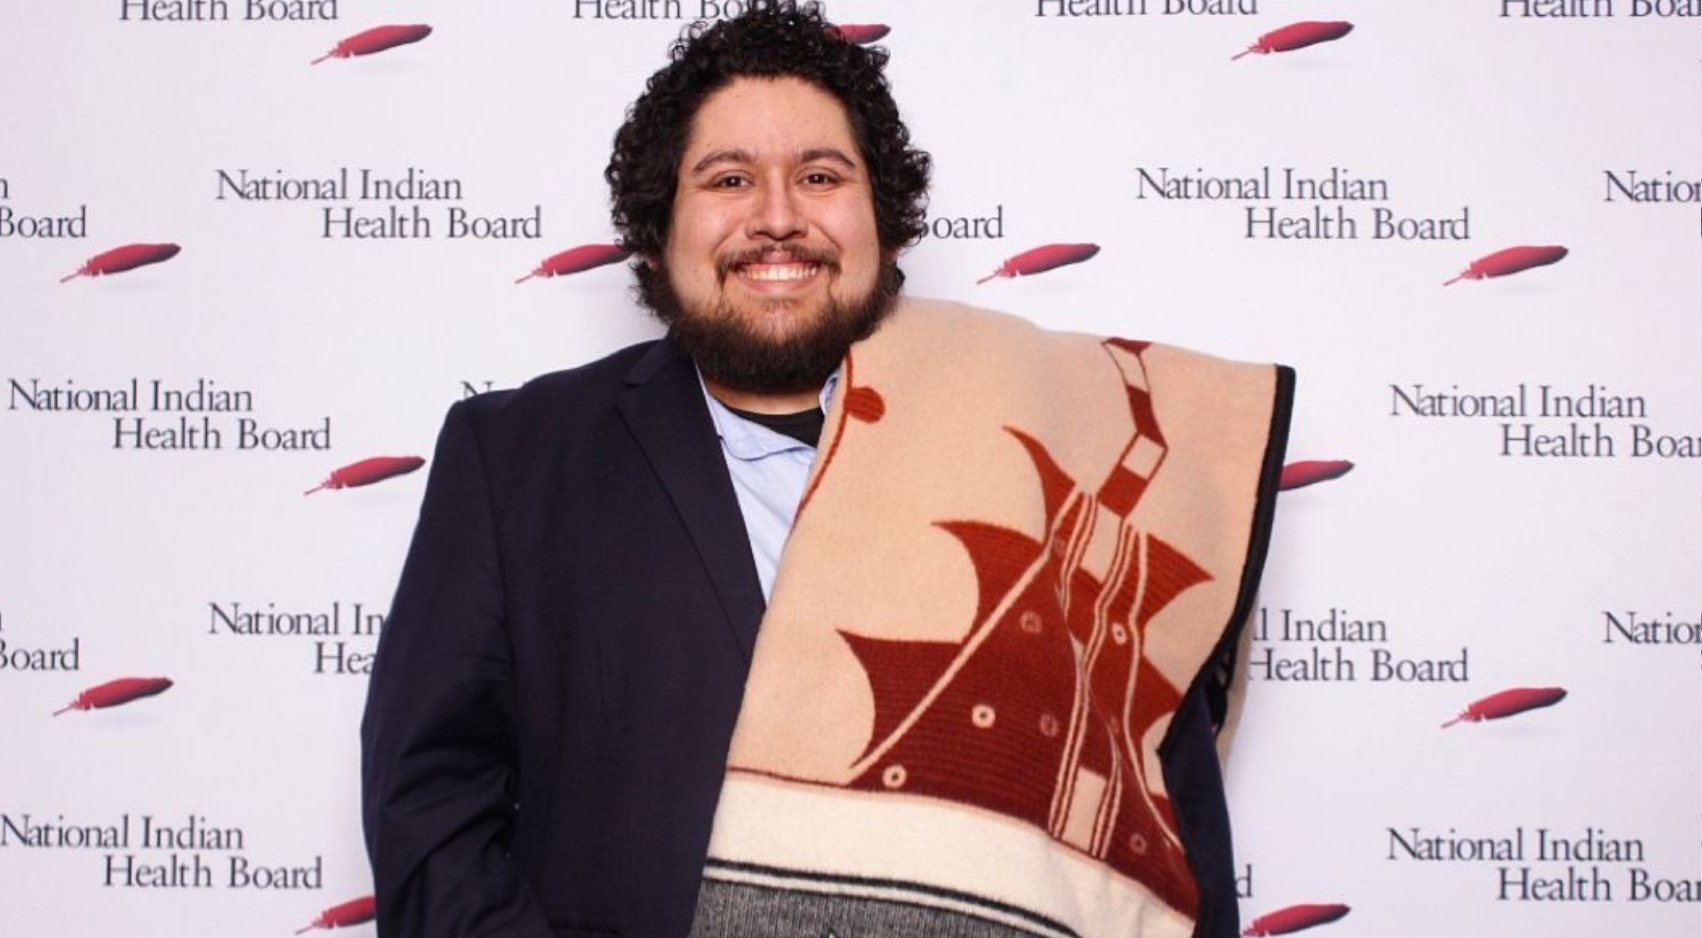 Alec Calac, Outstanding Service Award, National Indian Health Board, 2022. (Photo courtesy of Alec Calac)